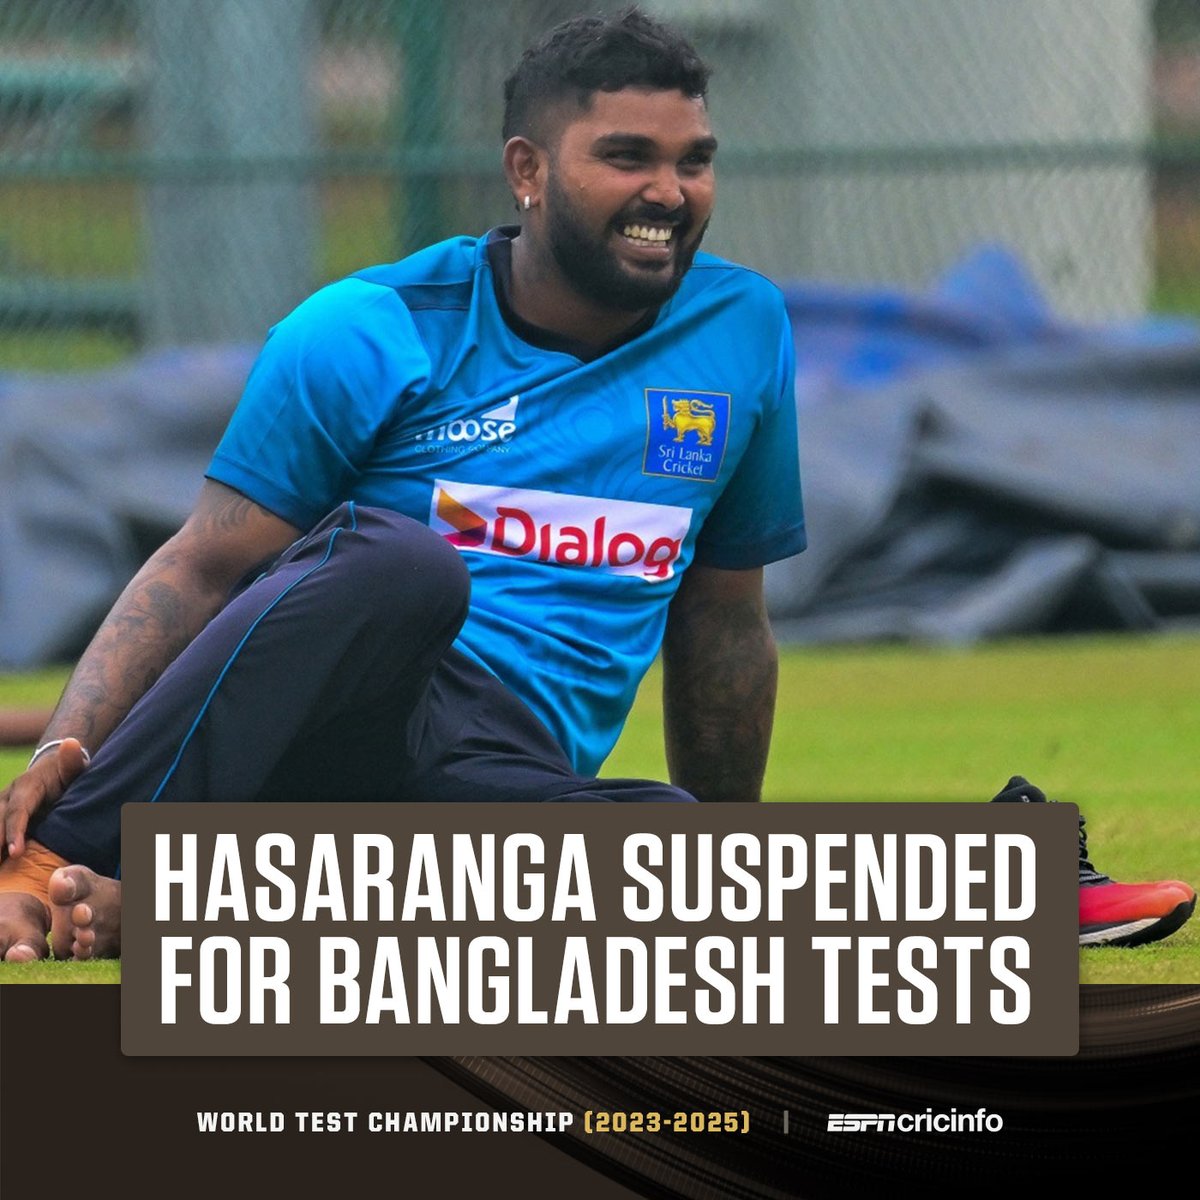 JUST IN: Wanindu Hasaranga's return to Test cricket won't happen in Bangladesh. He's been suspended for two Tests after being sanctioned three demerit points for showing dissent at the umpire's decision during the third #BANvSL ODI